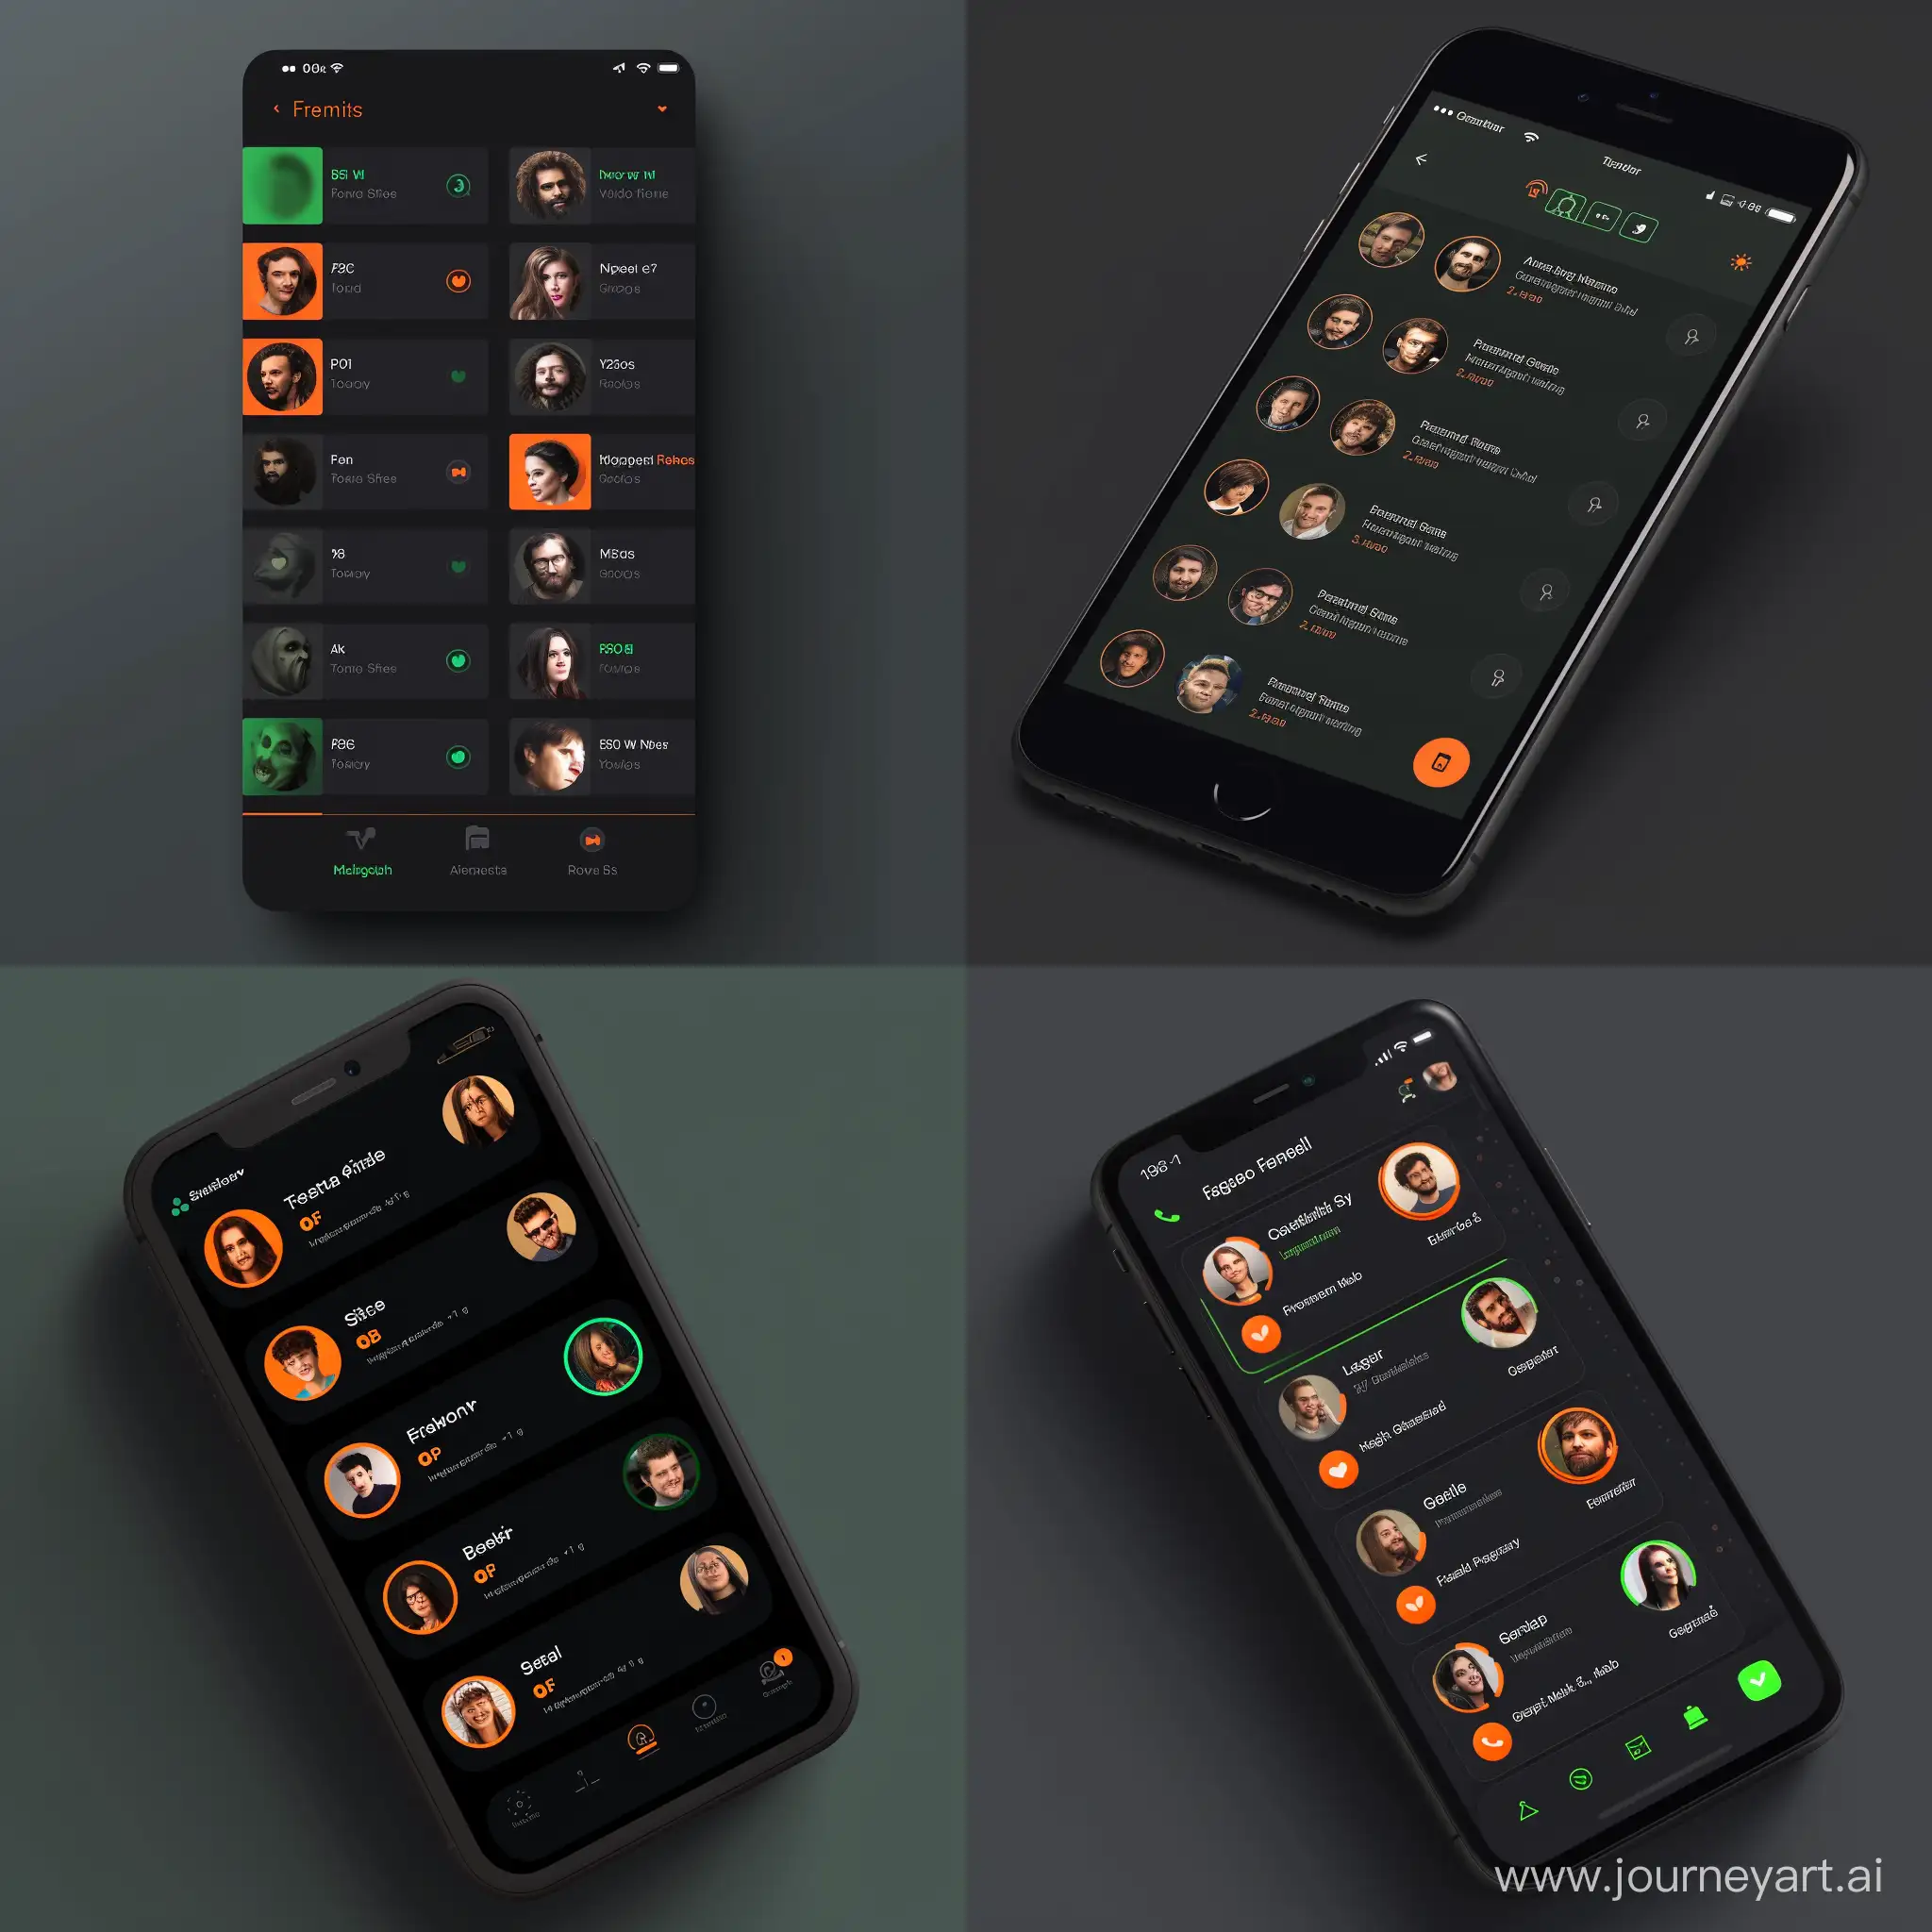 modern ios app list of friends with icons
main color - dark
color 1 - green
color 2 - orange
